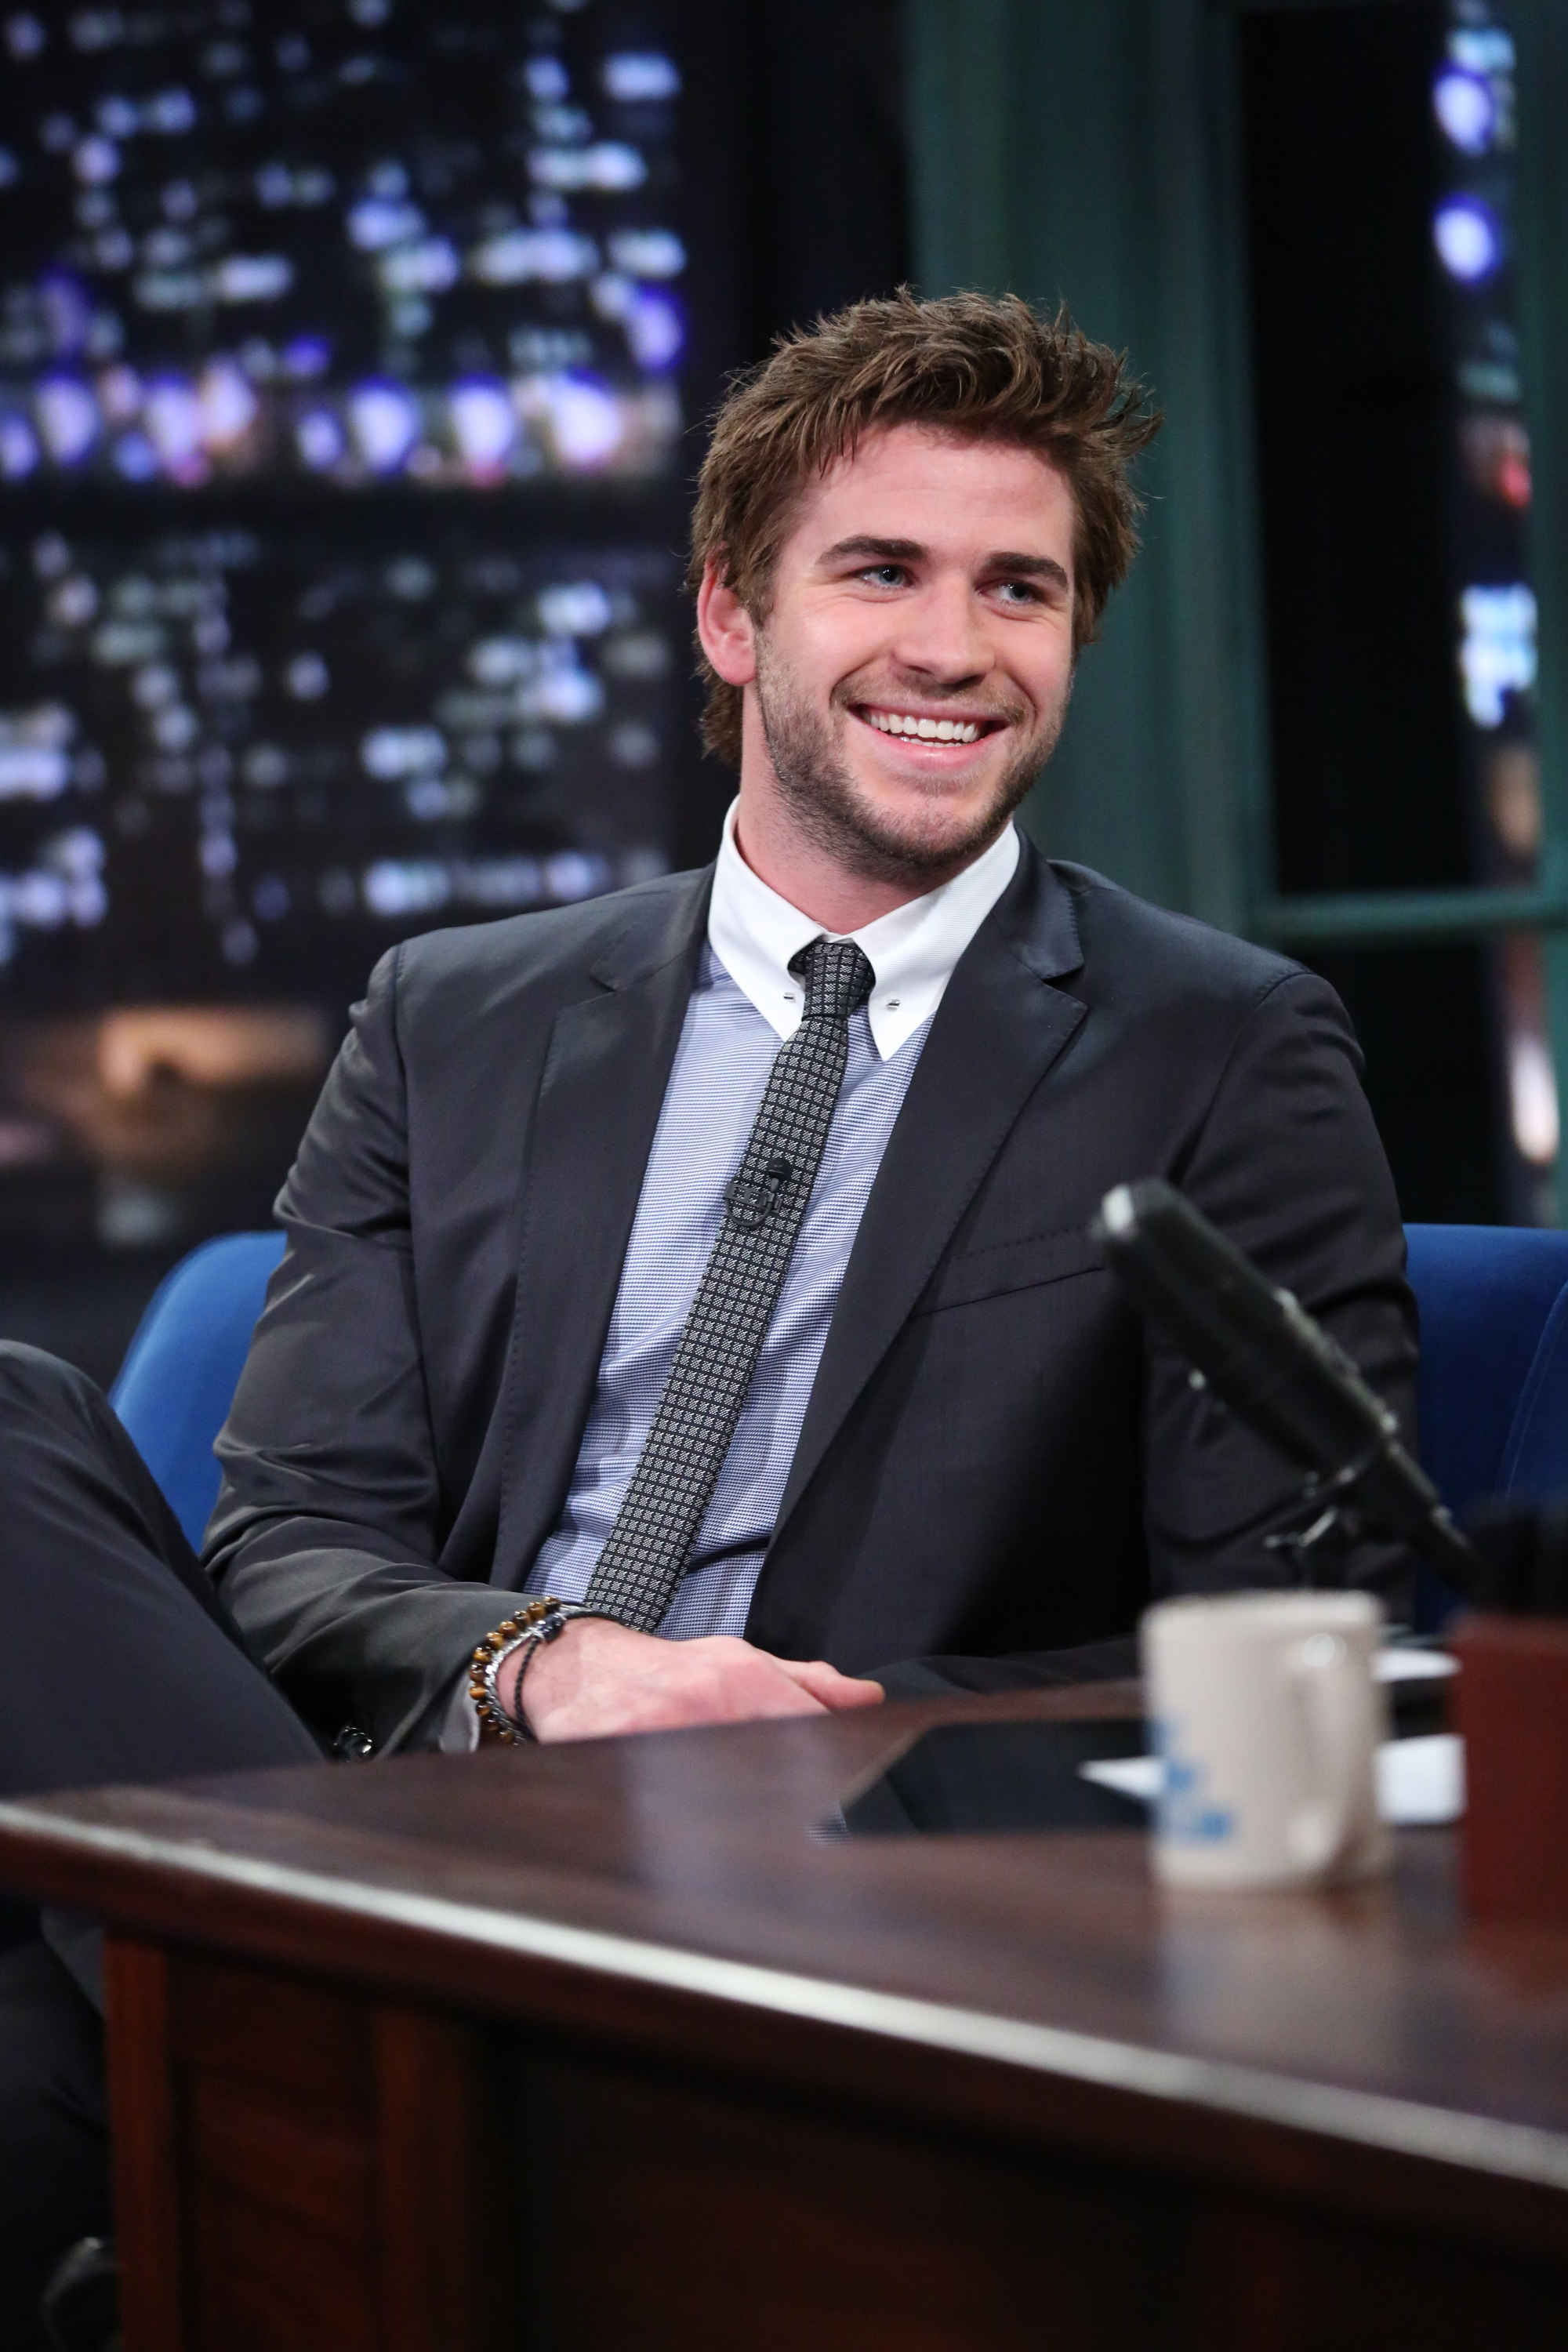 Liam Hemsworth during an episode of the "Late Night Show" with Jimmy Fallon - Season 5 on November 21, 2013 | Source: Getty Images